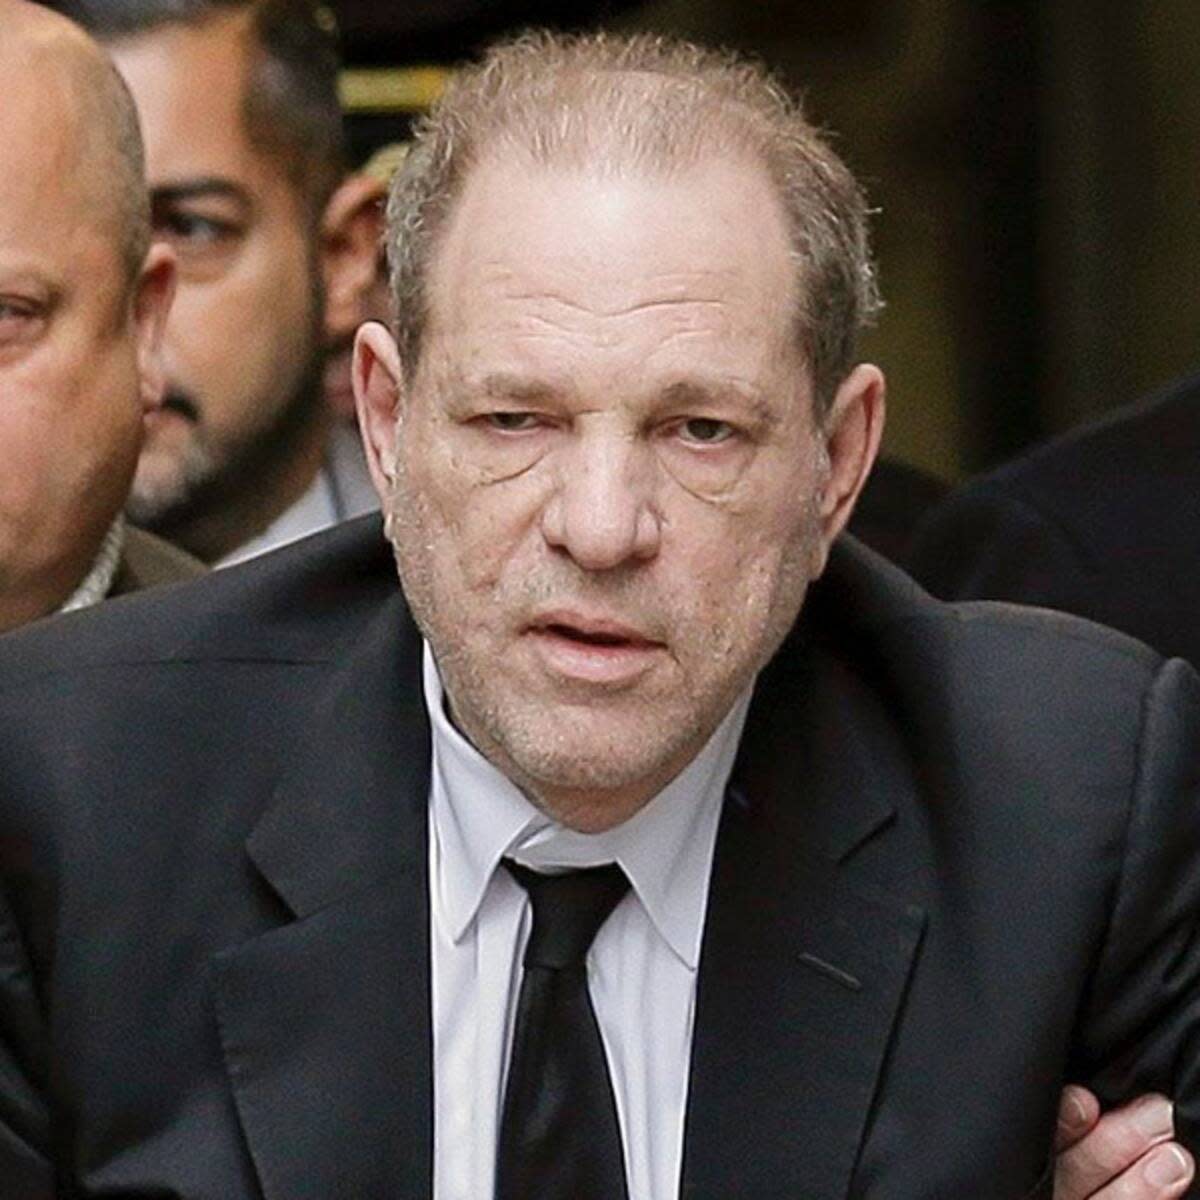 Who Is Harvey Weinstein and How Was He Able to Get Away With Decades of Rape?